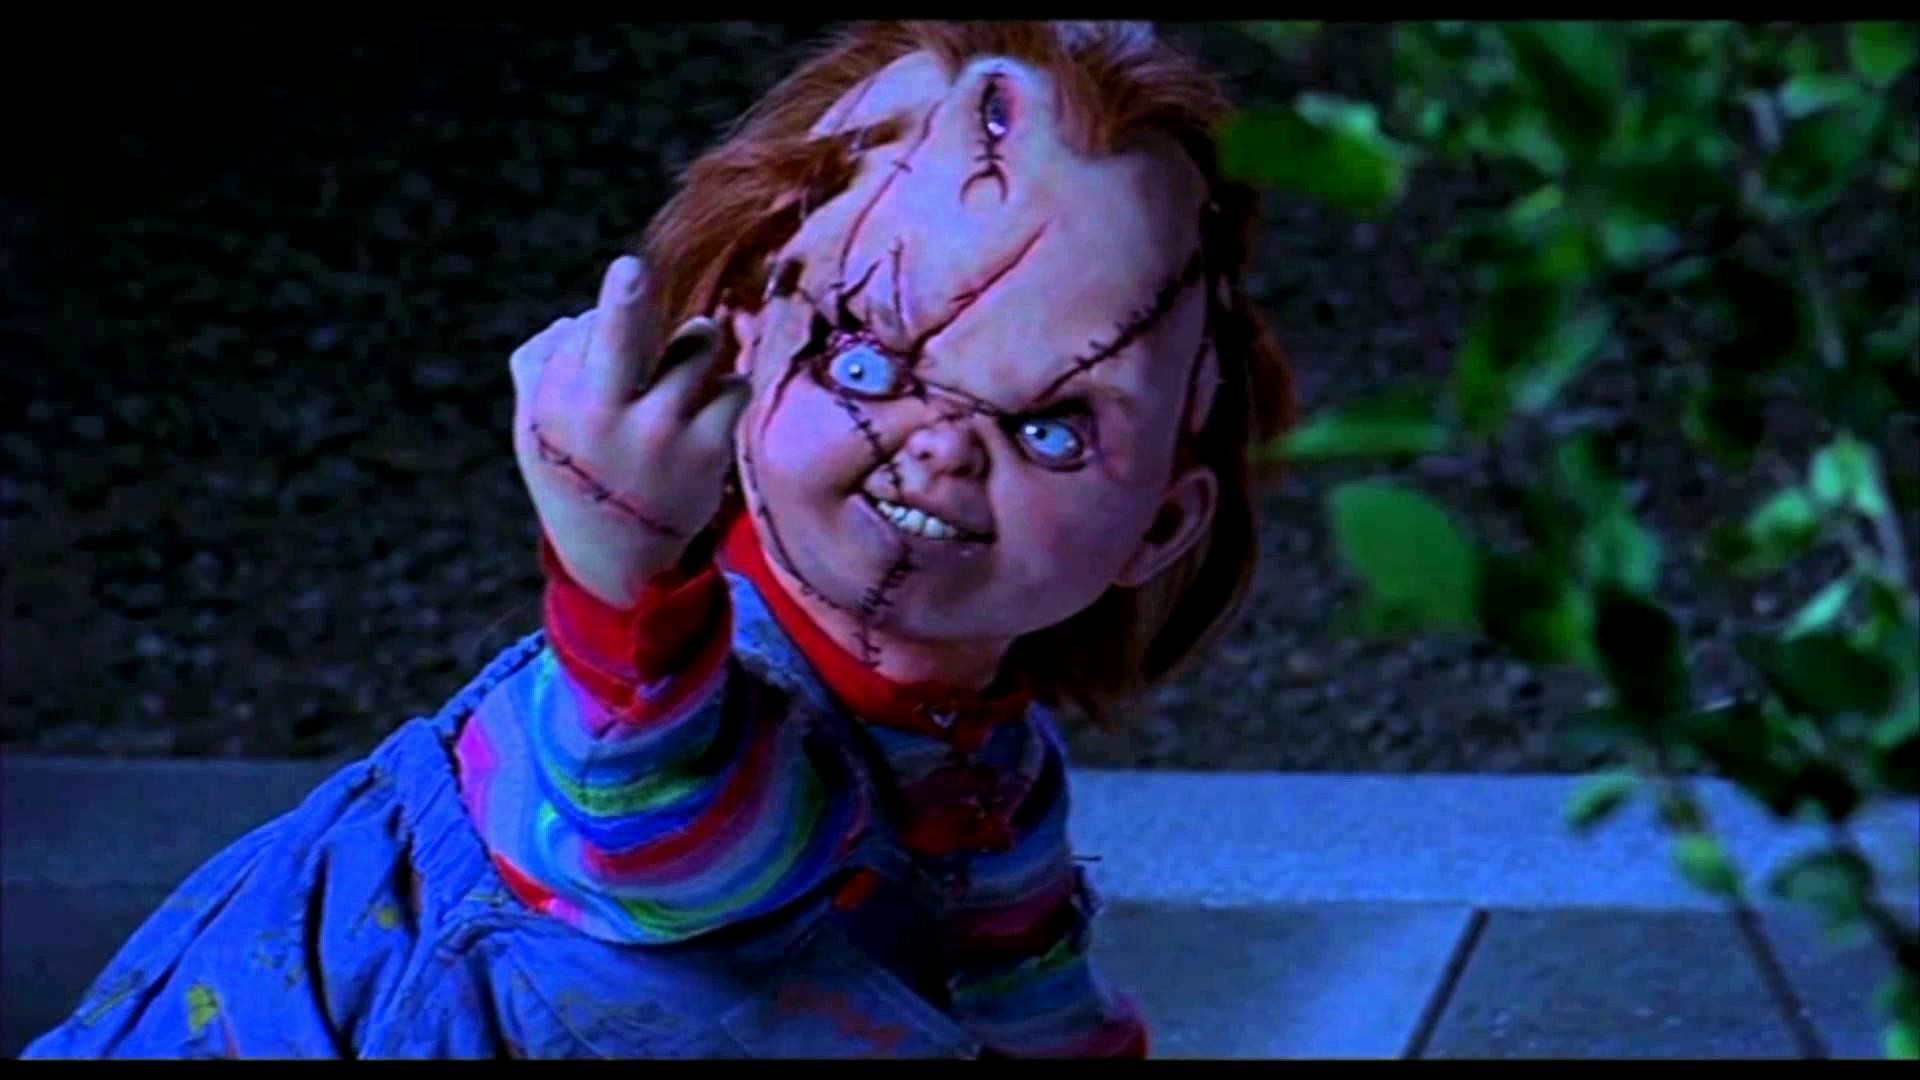 Seed Of Chucky Wallpaper.